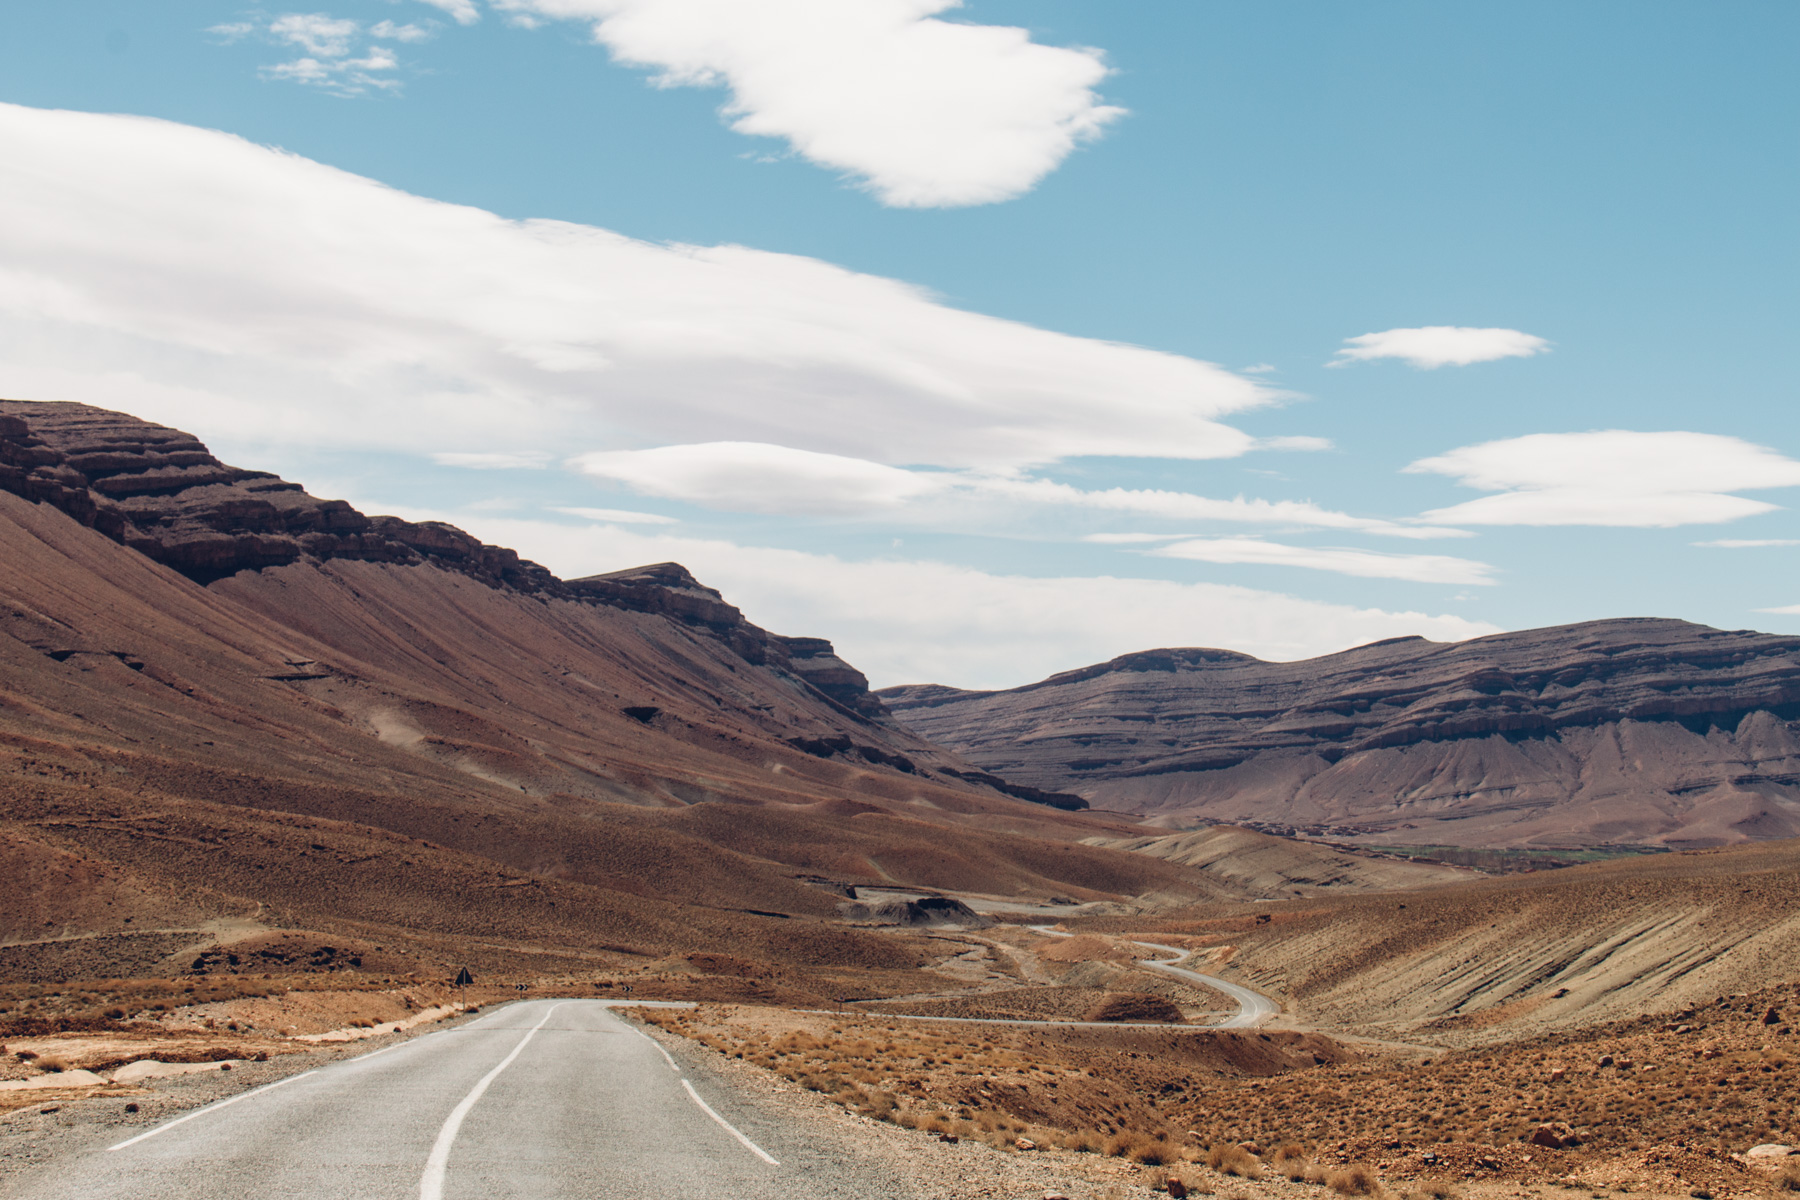 21 things to know before a Moroccan road trip — along dusty roads